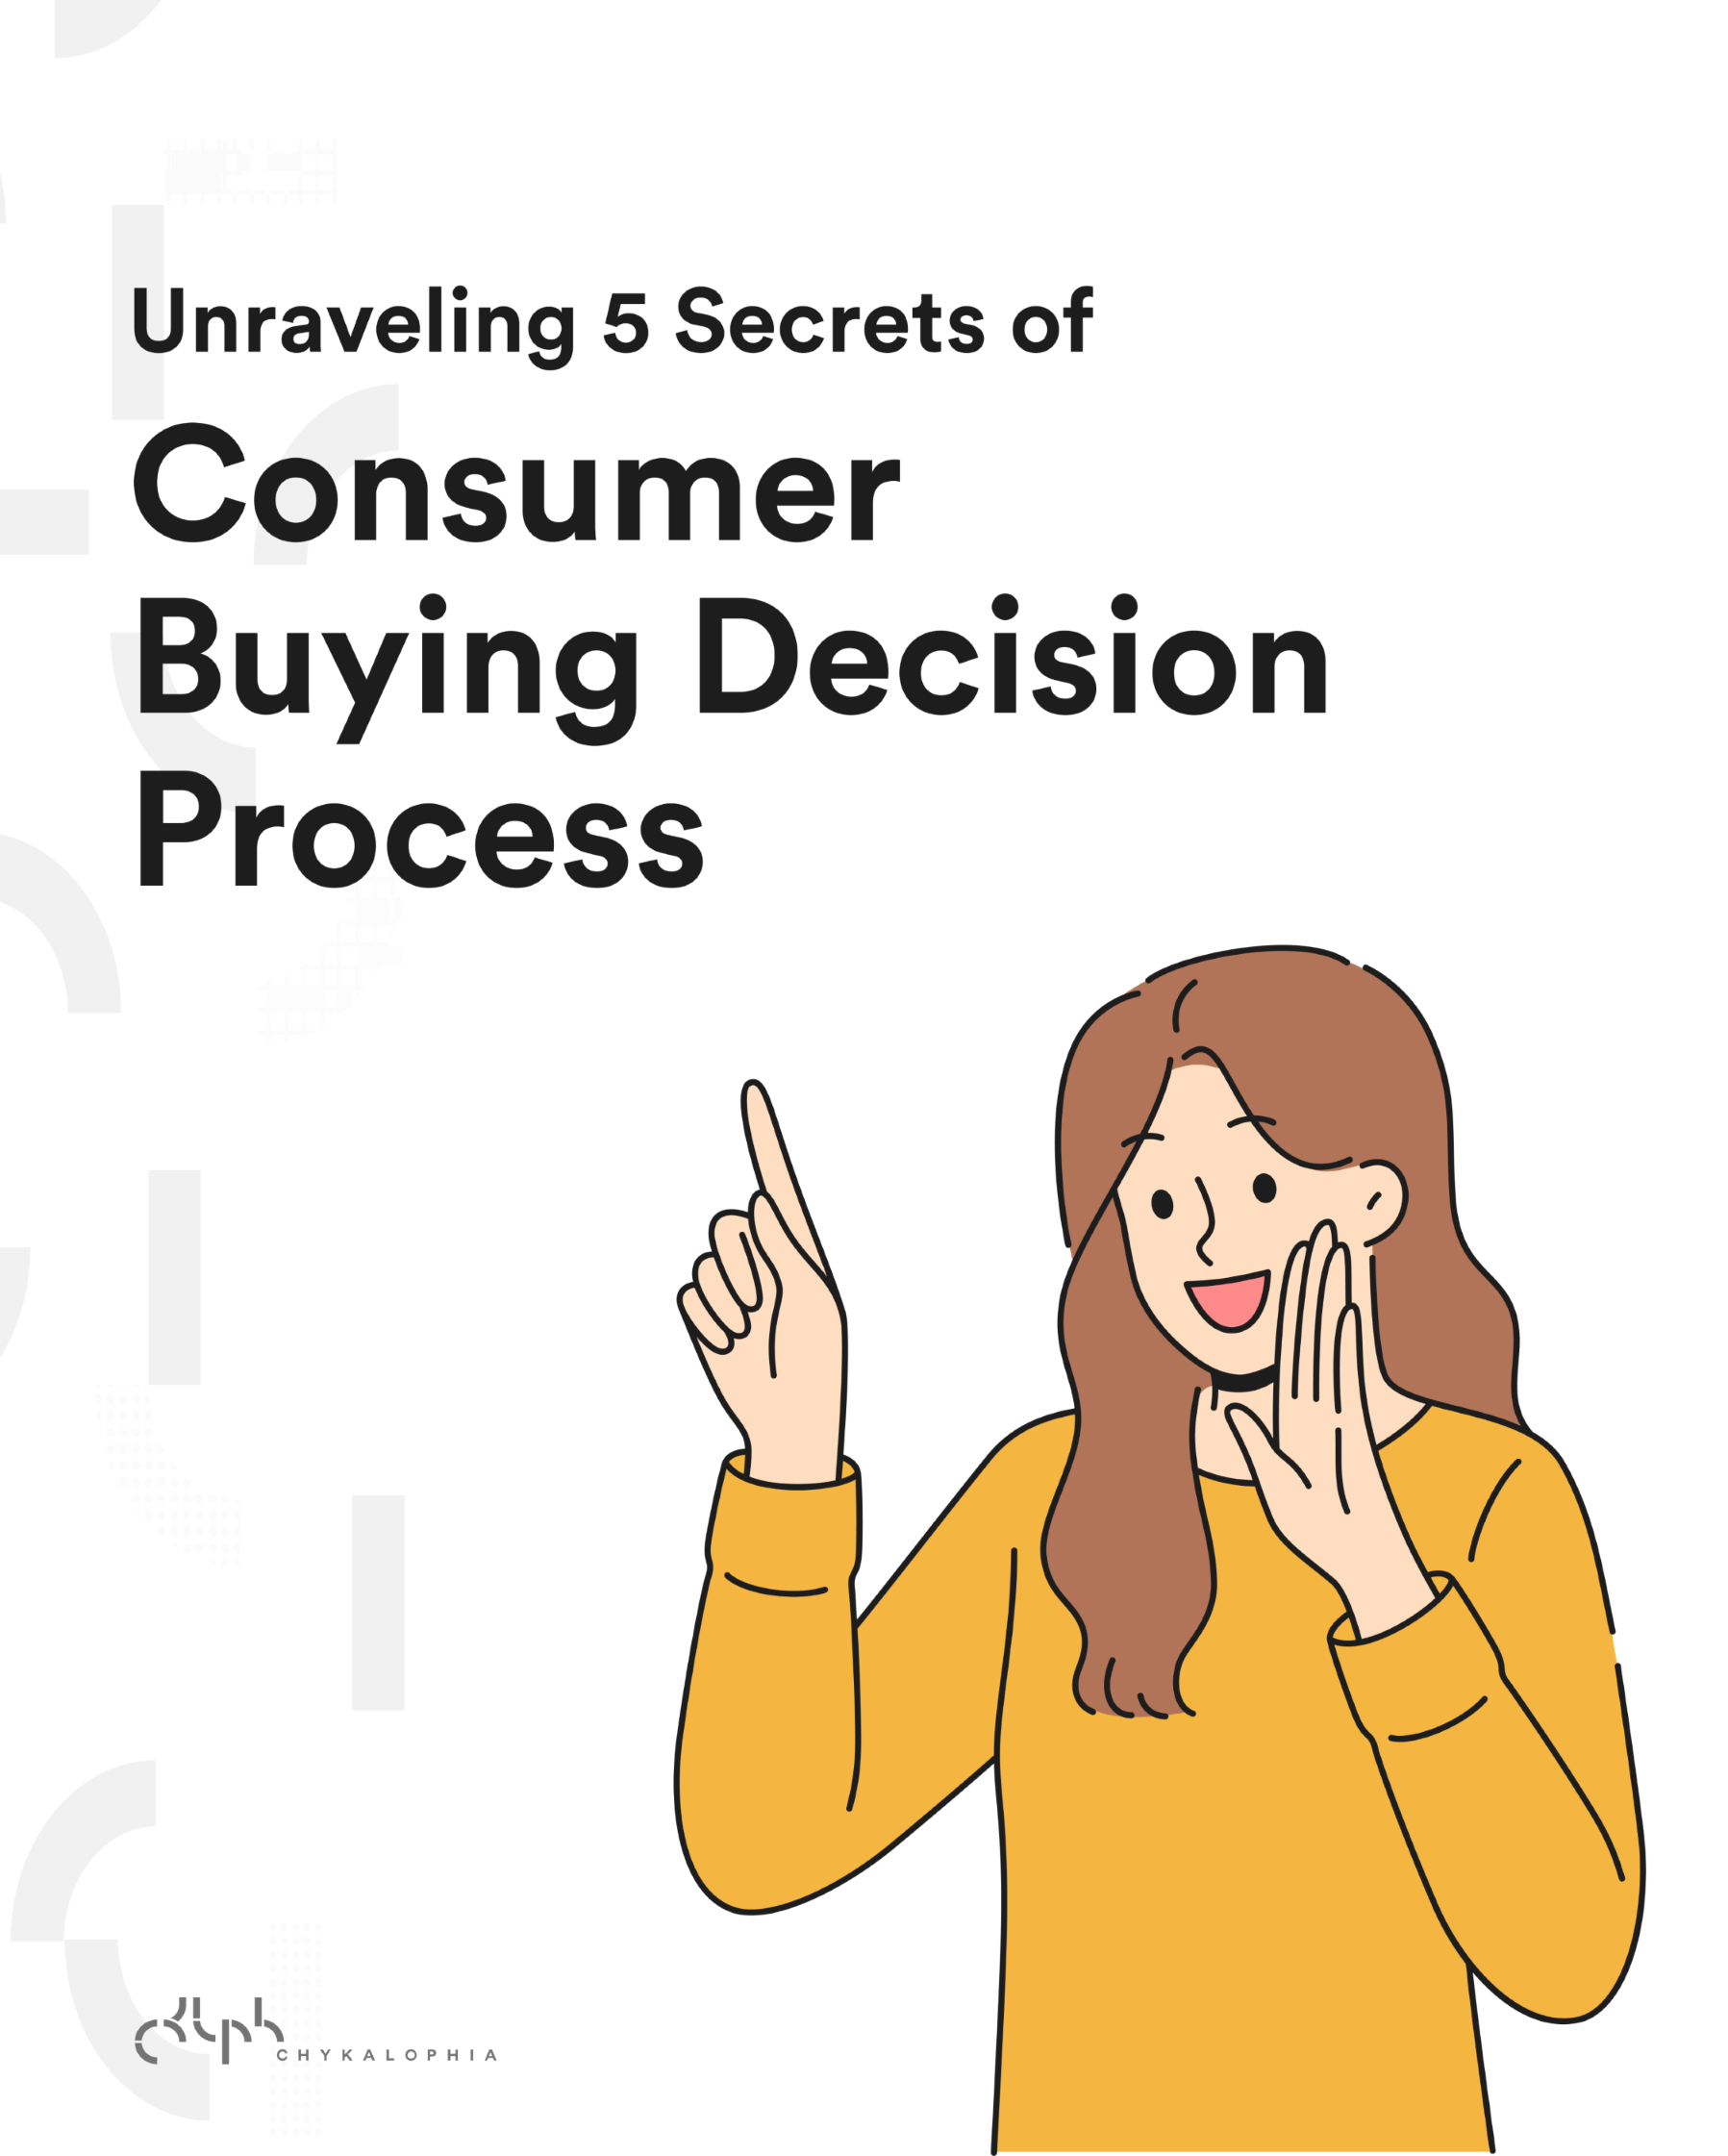 Unraveling 5 Secrets of Consumer Buying Decision Process 2